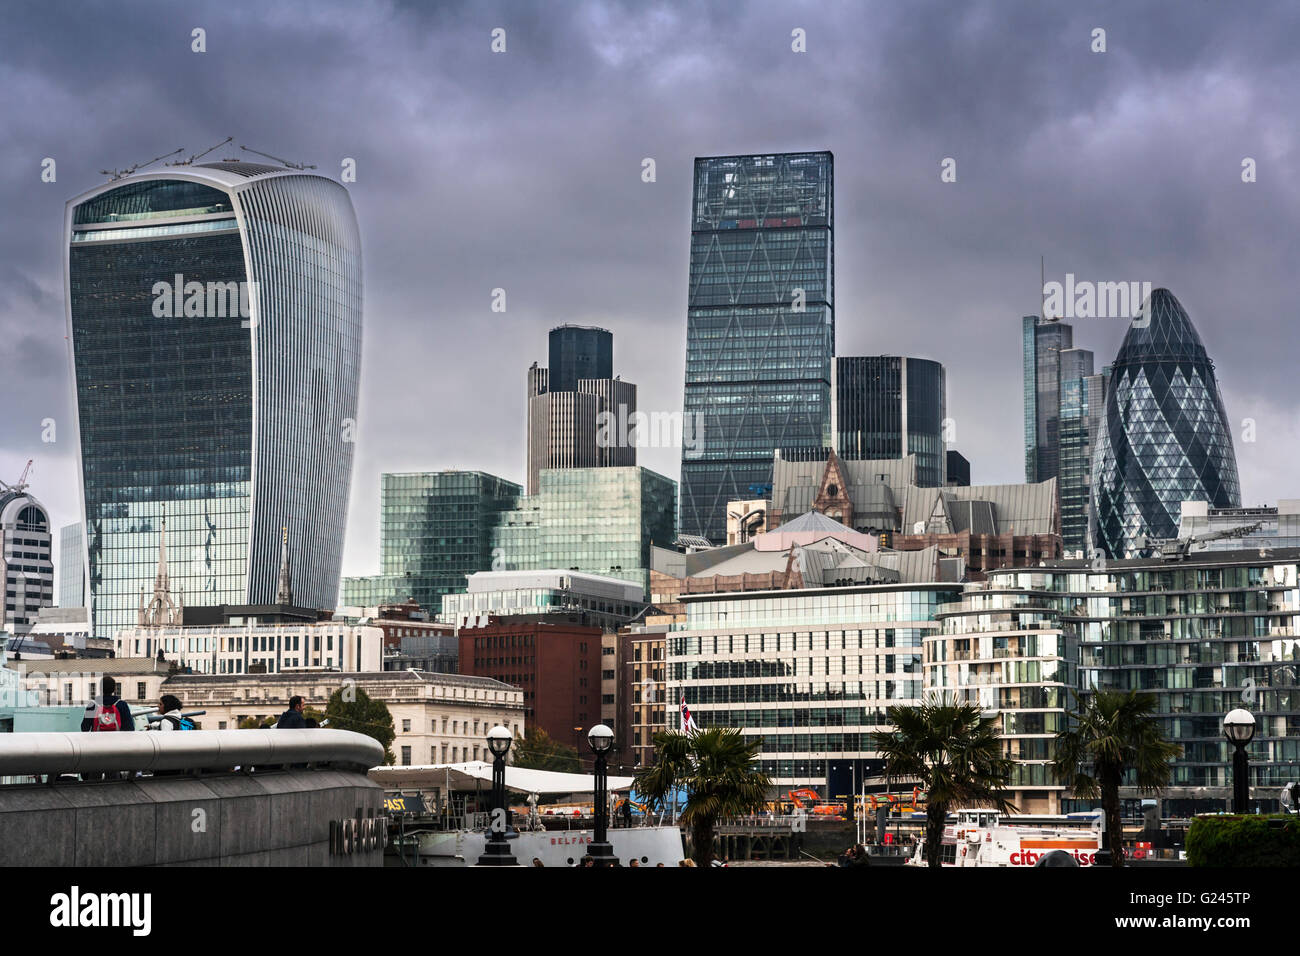 London City Skyline From The South Bank, London, England. Stock Photo